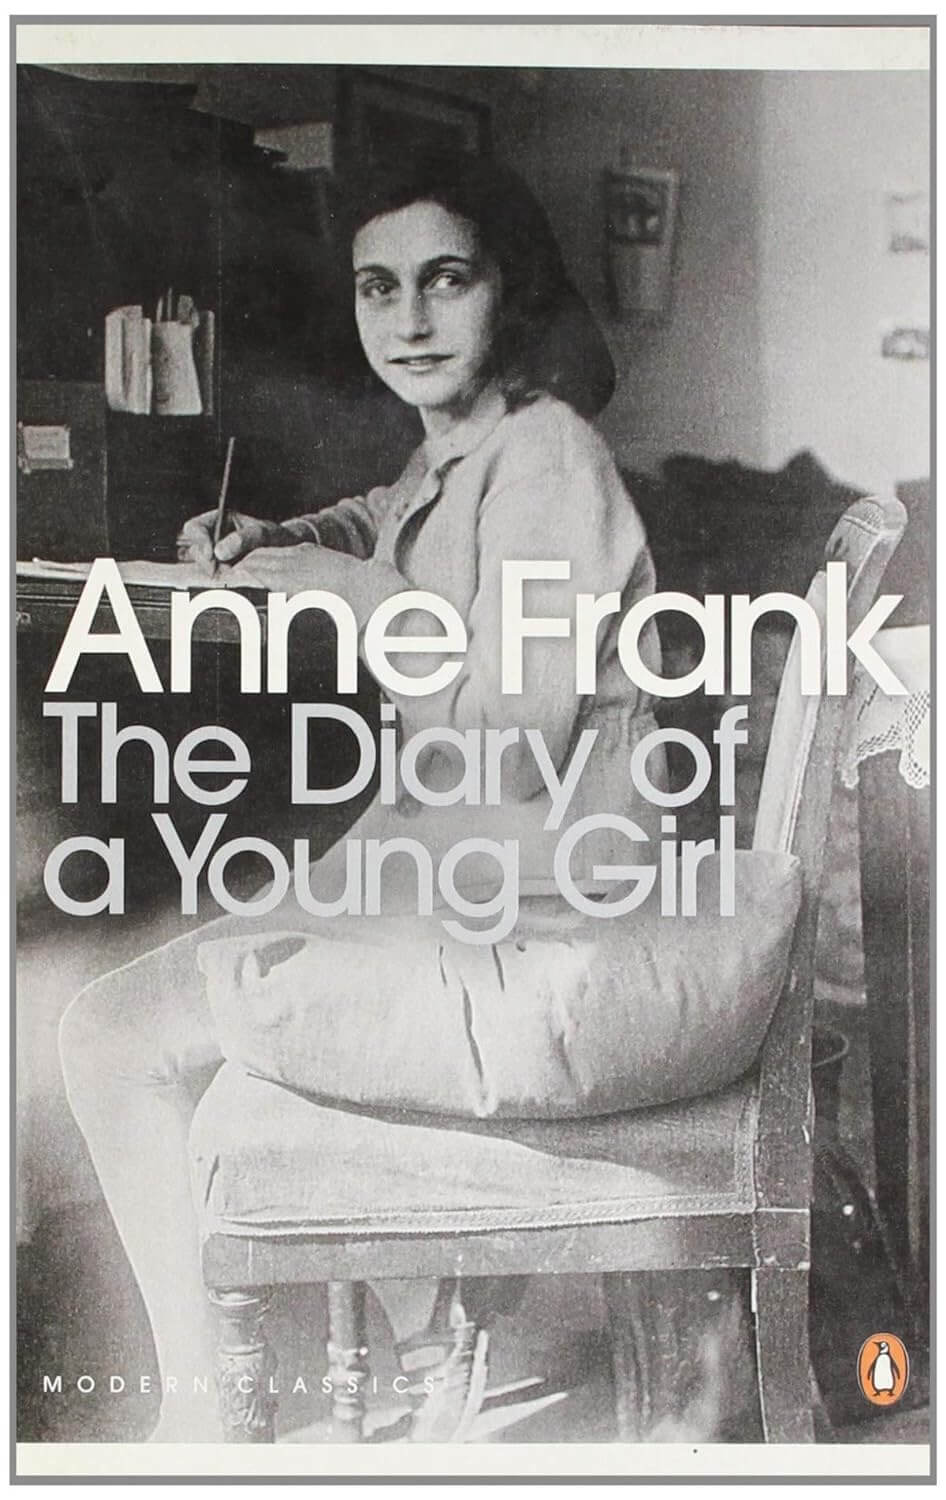 "The Diary of a Young Girl" by Anne Frank